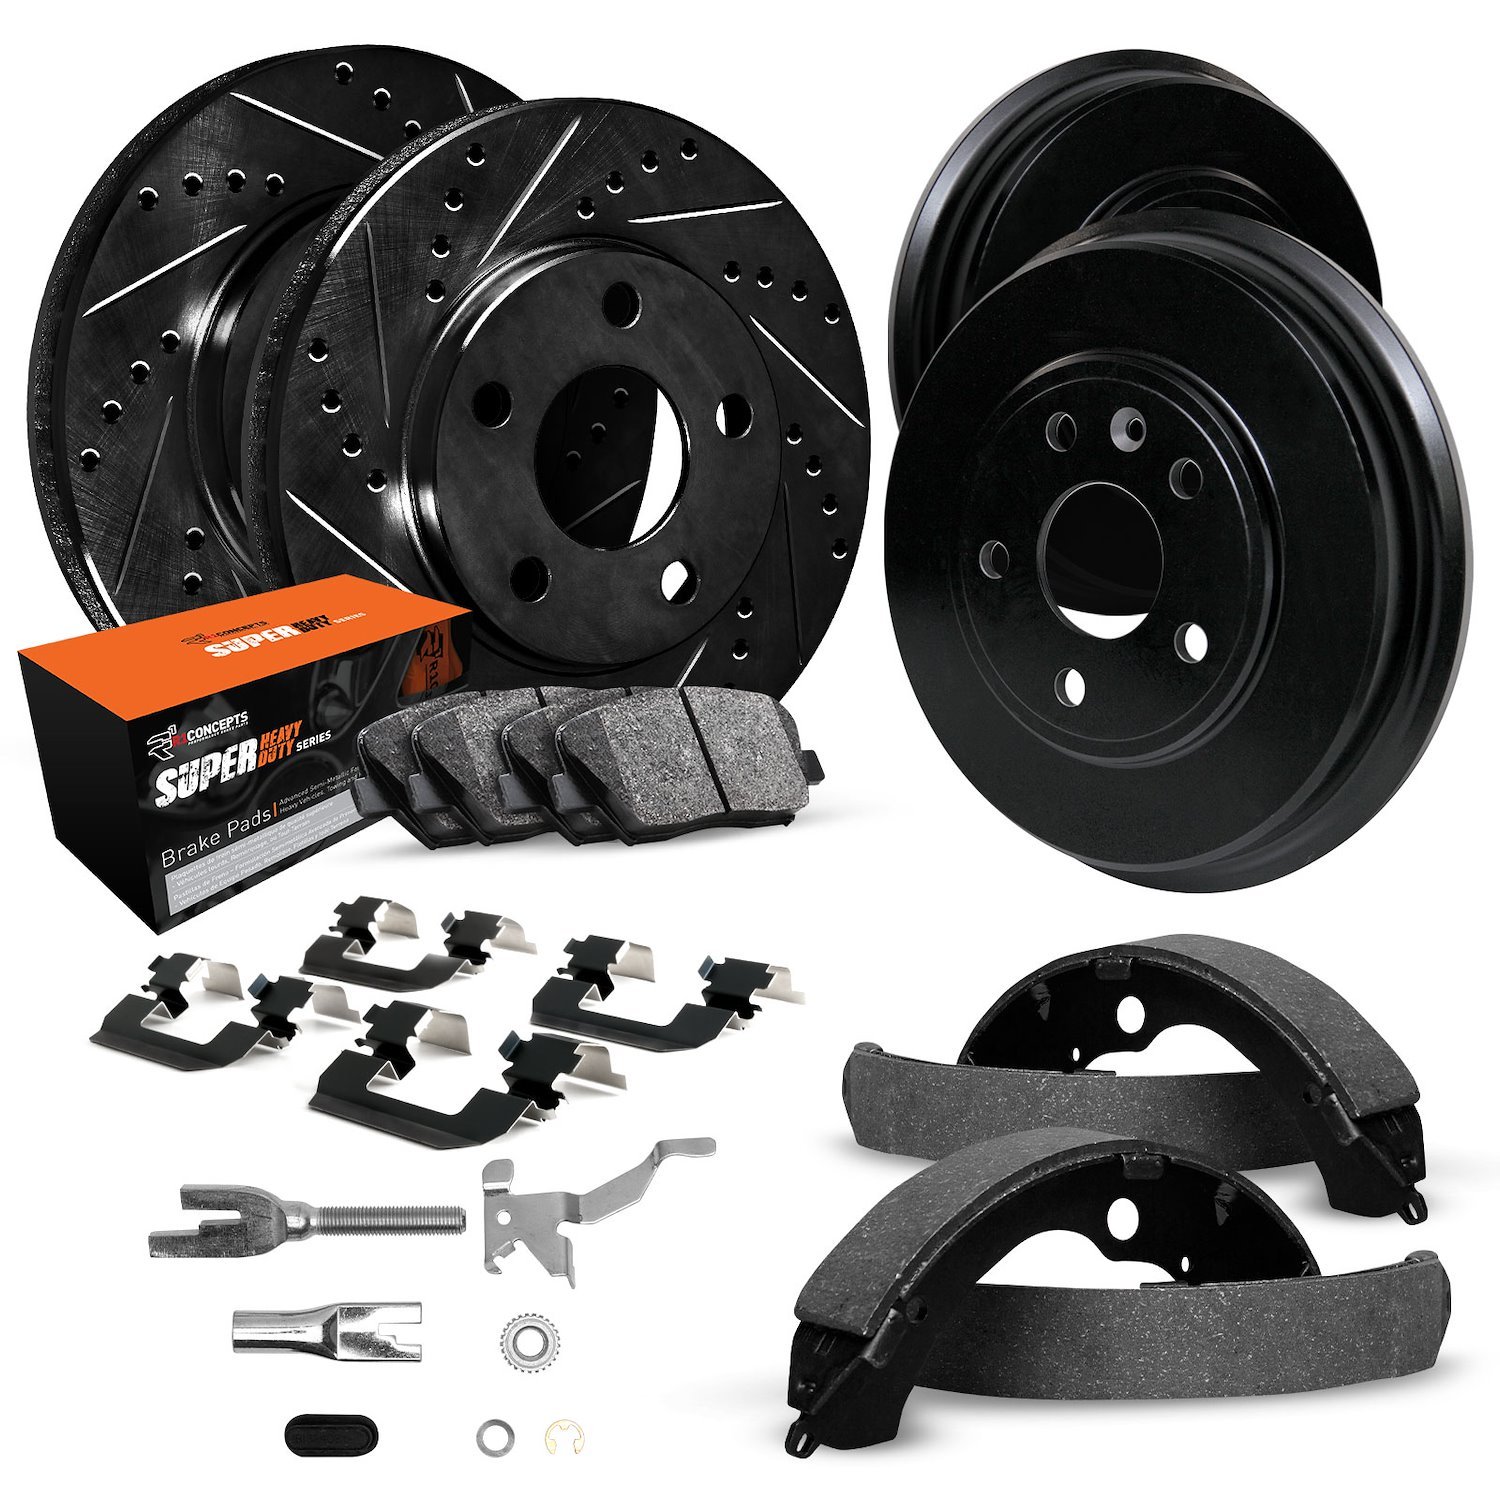 E-Line Slotted Black Brake Rotor & Drum Set w/Super-Duty Pads, Shoes, Hardware/Adjusters, 1995-1997 Ford/Lincoln/Mercury/Mazda